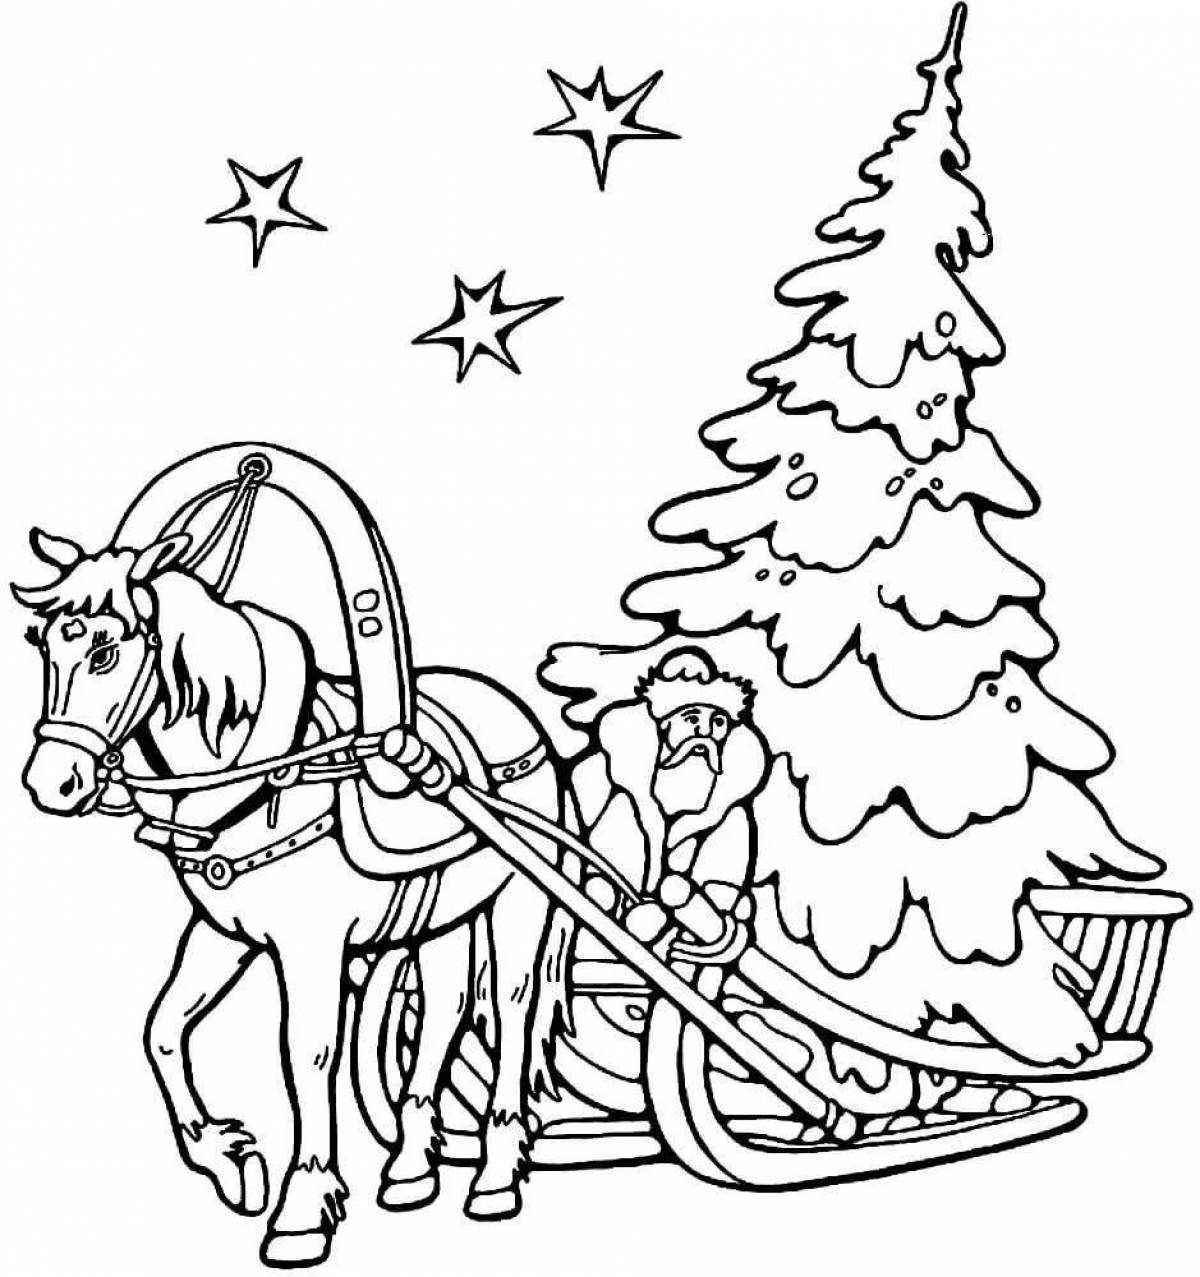 Festive Christmas coloring book 9 years old